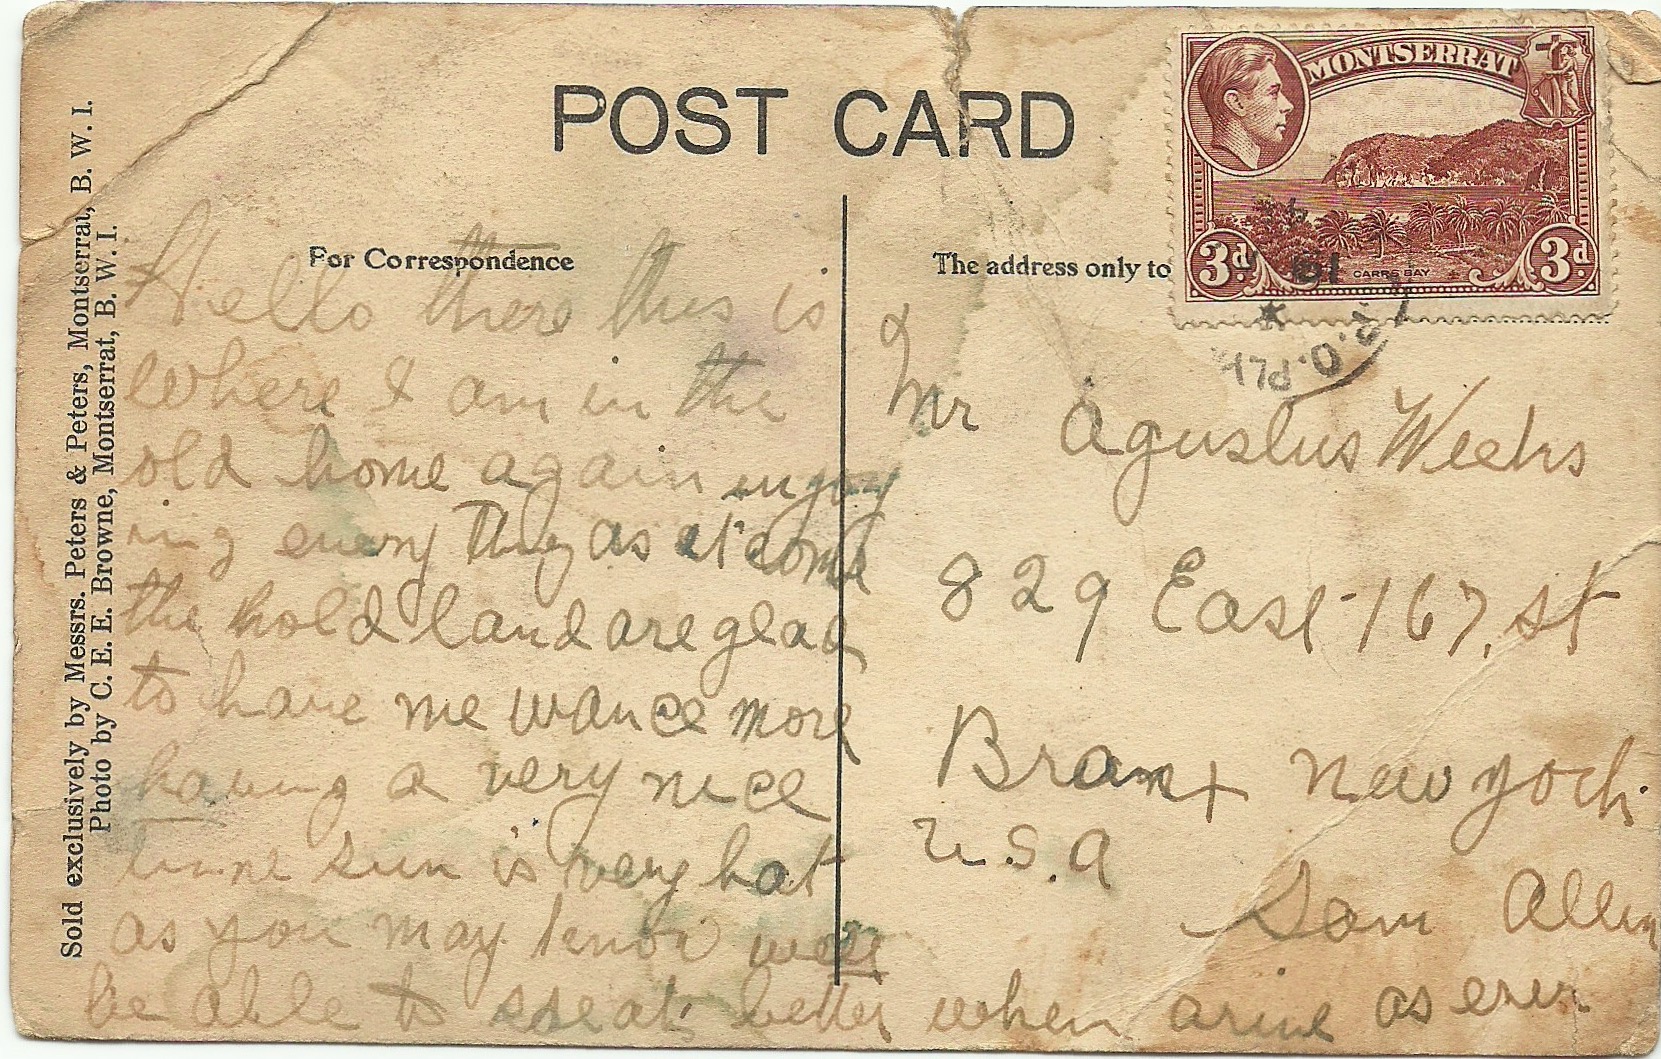 Postcard to Augustus A. Weeks, Aubrey's father, from in-law, Sam Allen, in the 1940s.